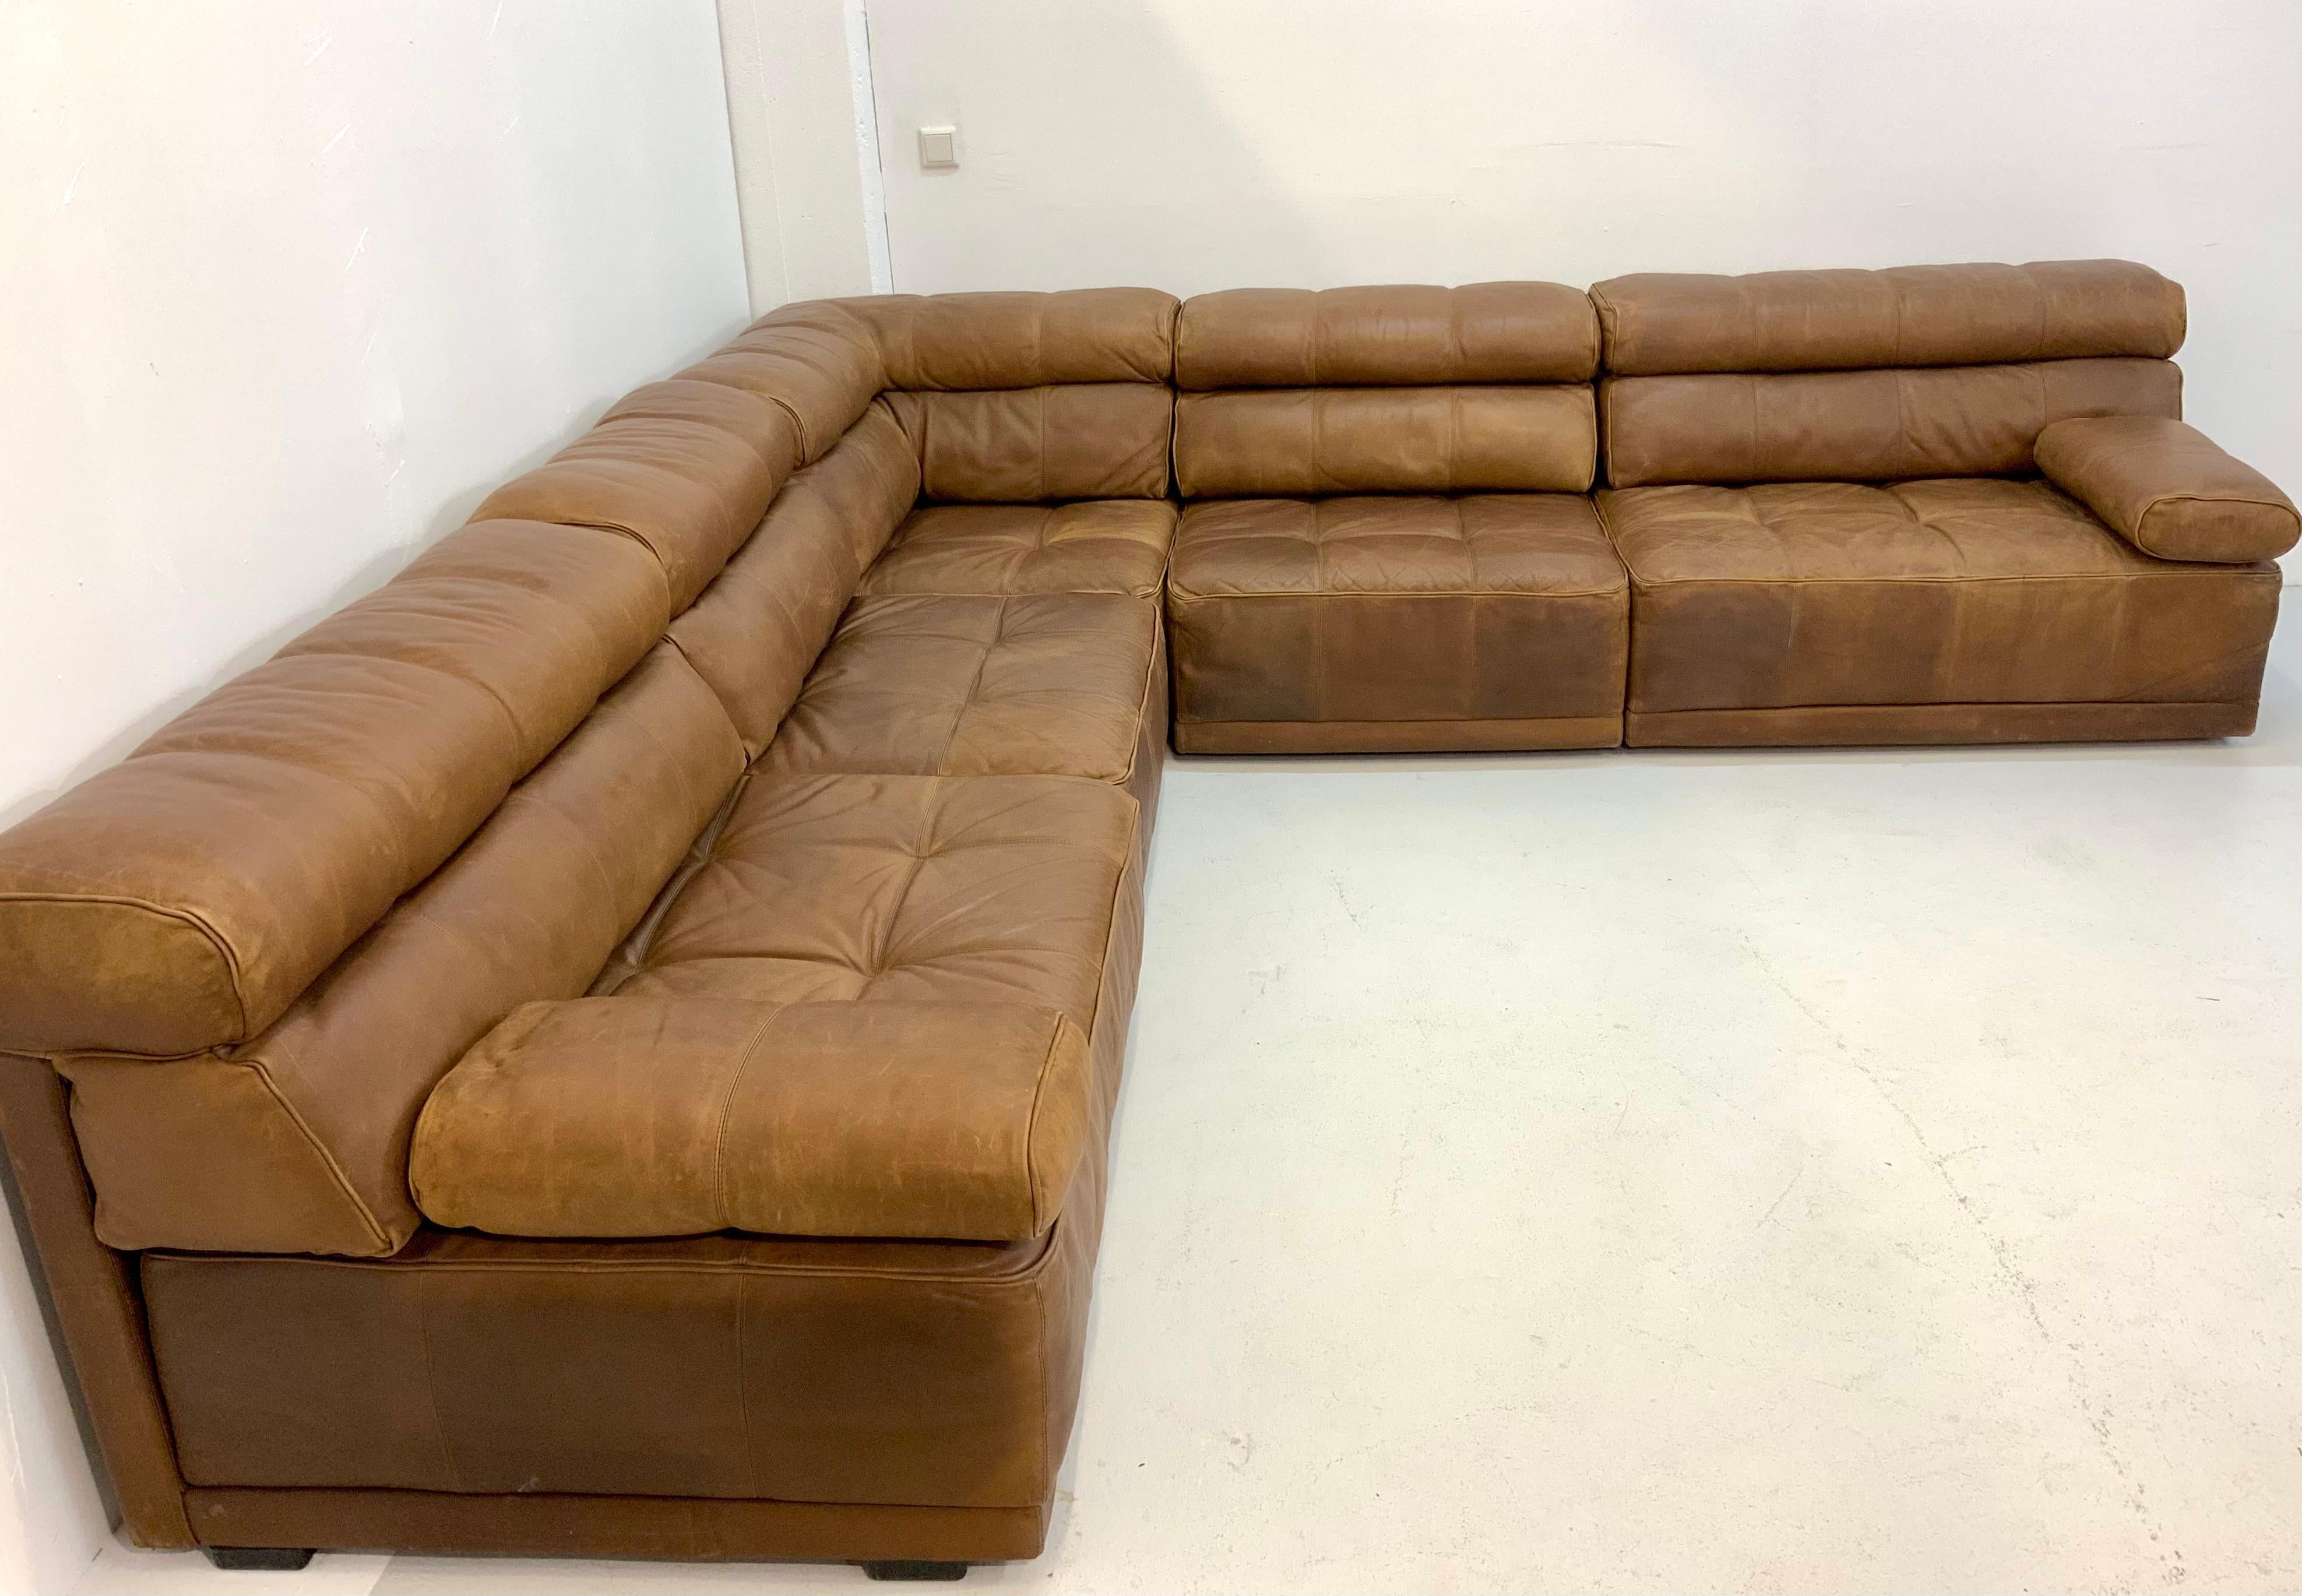 70's style couch